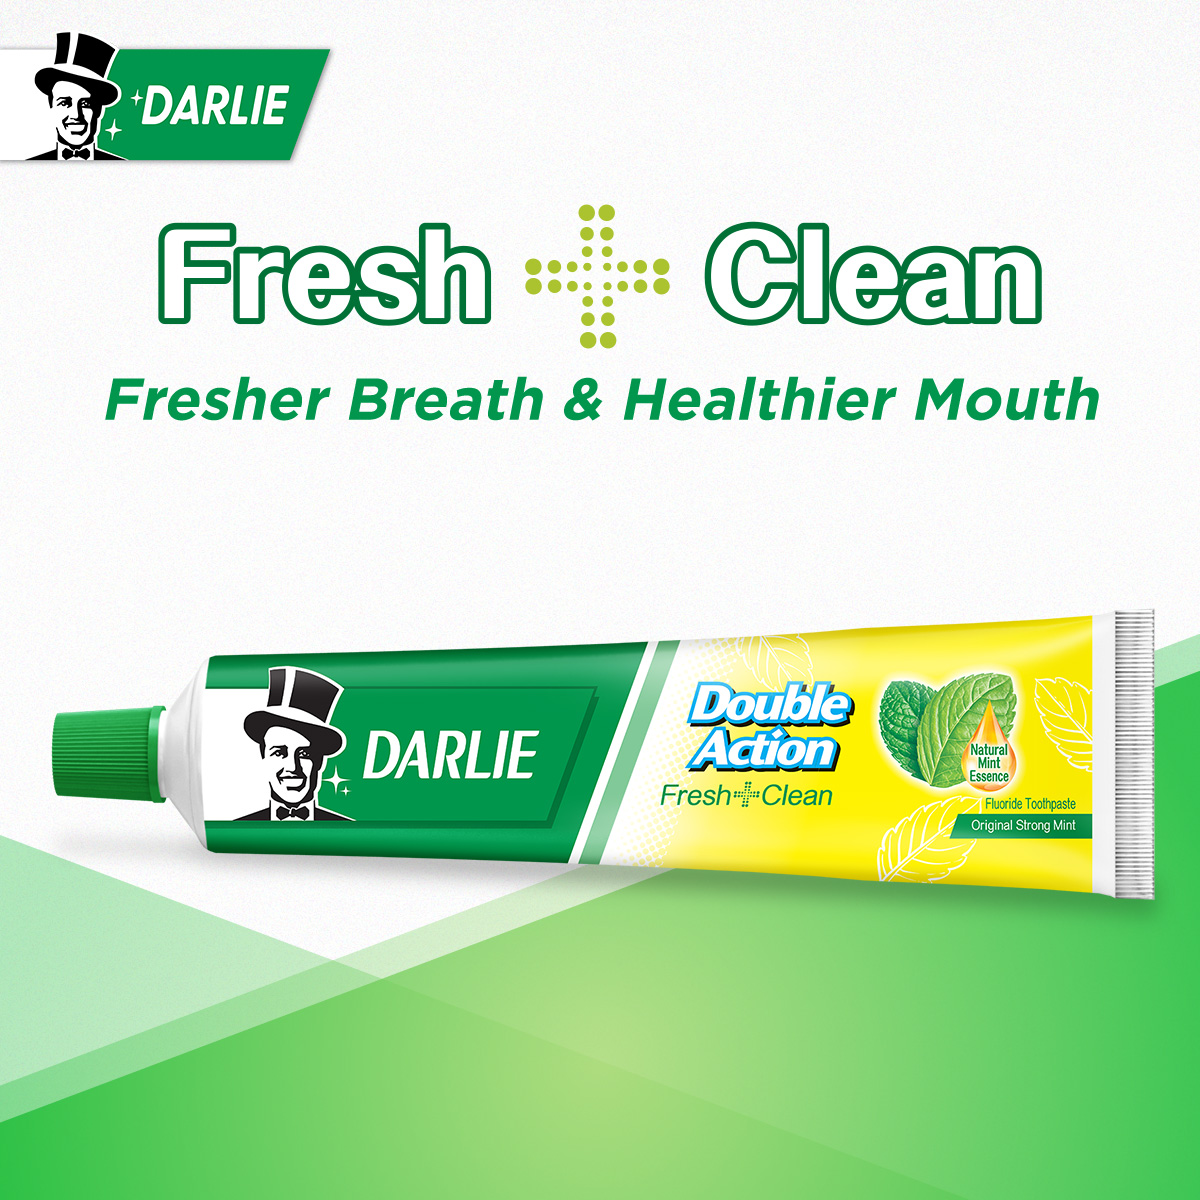 Darlie Double Action Fresh + Clean Toothpaste Original Strong Mint 50g